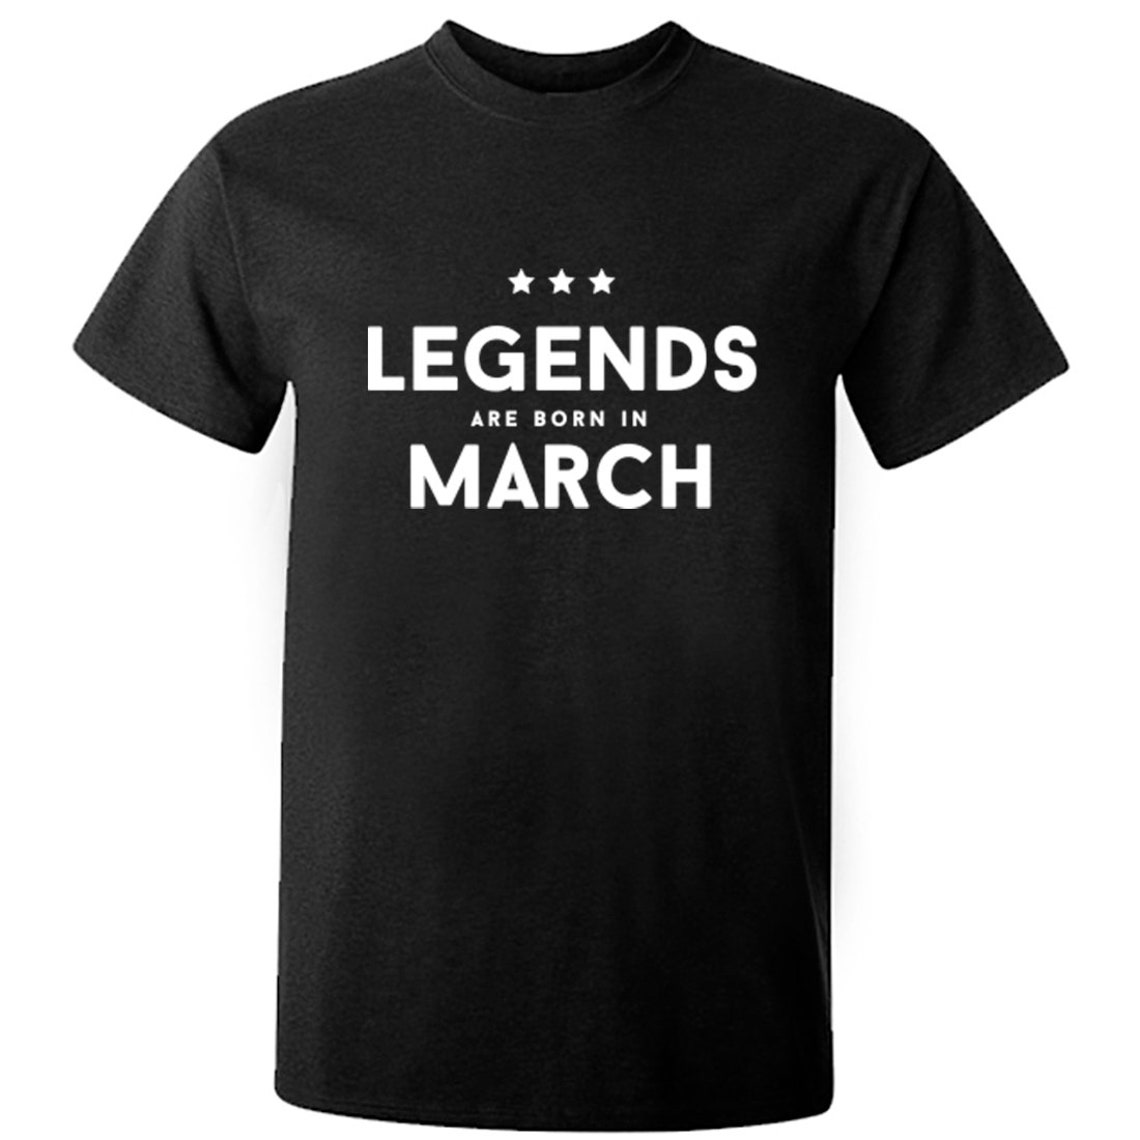 Legends Are Born In March unisex fit t-shirt